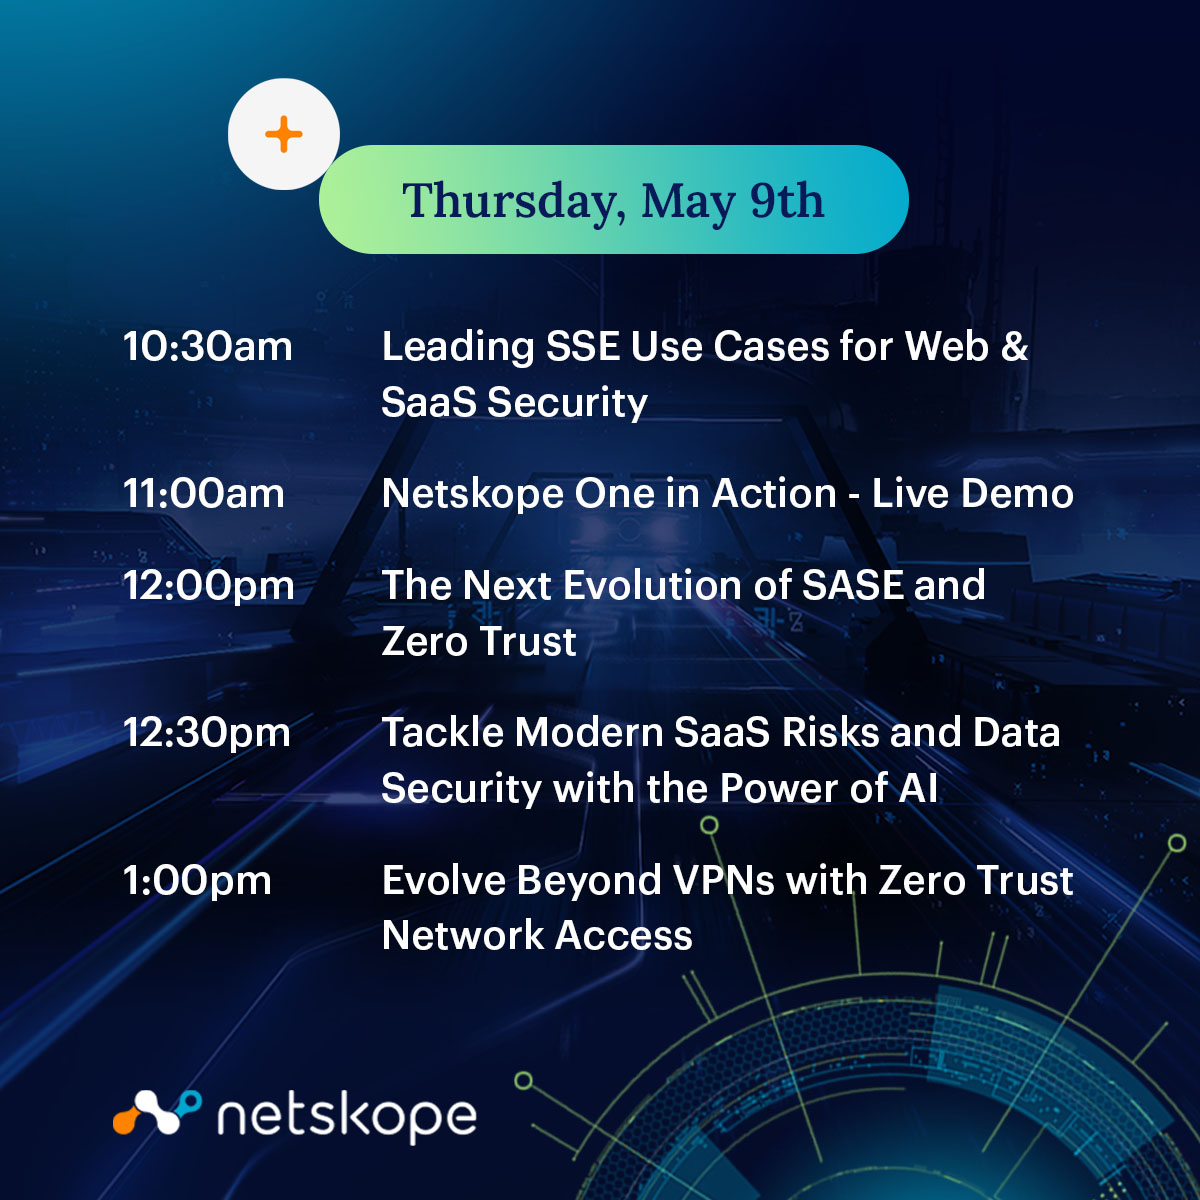 Last chance: be sure to stop by the Netskope booth to experience the next evolution of #SASE and #ZeroTrust. 📍 Booth #1035, Moscone South 💡 Pro tip: Save this post for easy access to the schedule throughout the day.